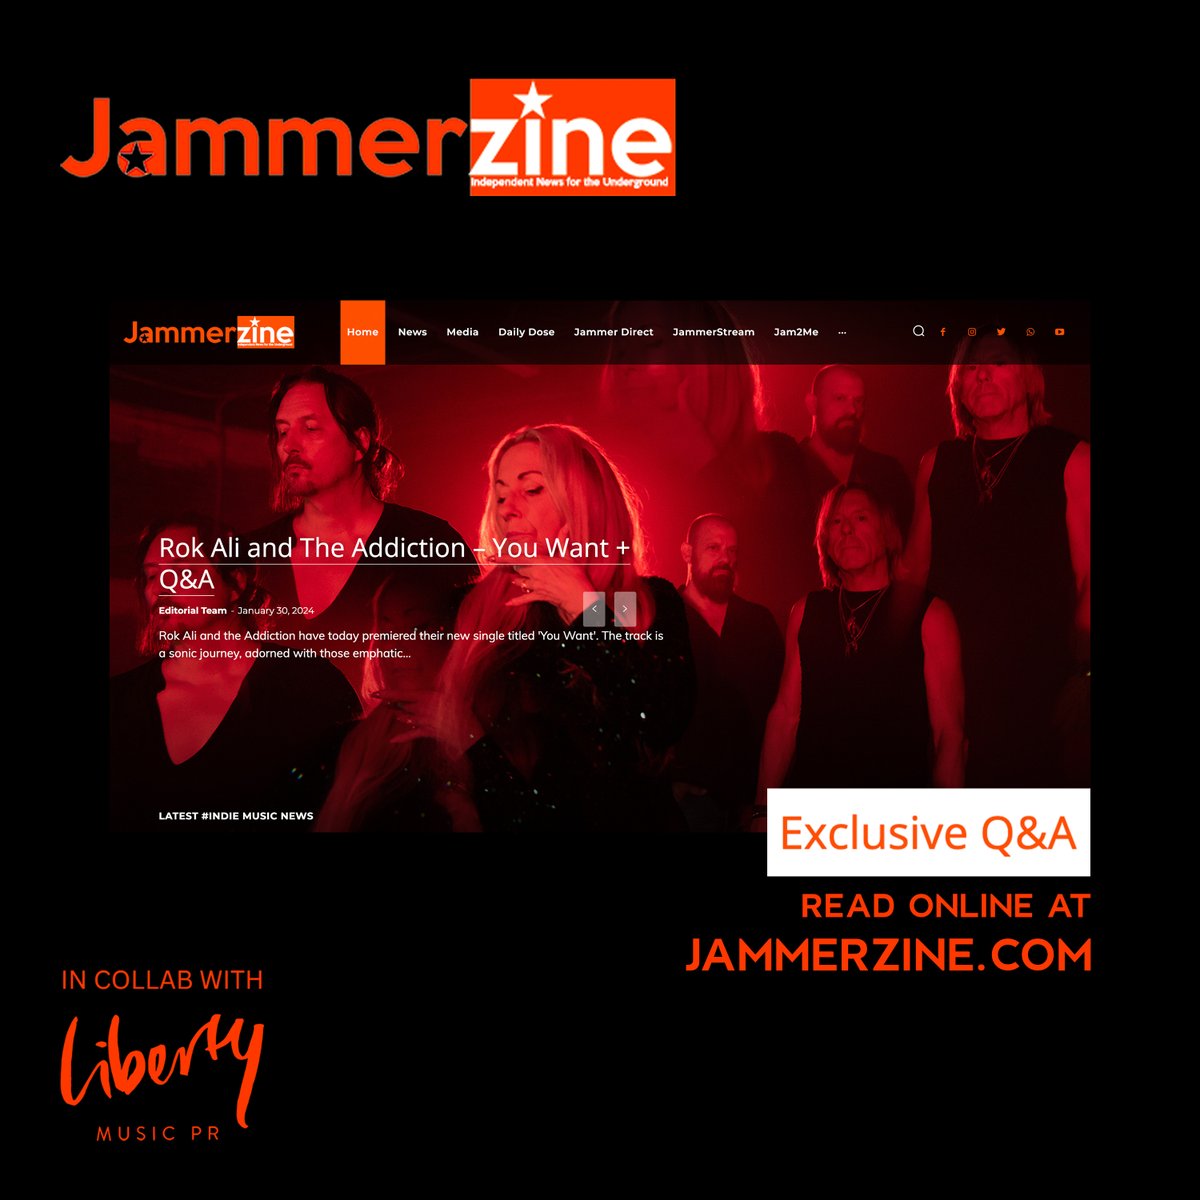 Thank you @jammerzine + @JammerDirect for featuring “You Want.” We are so appreciative! Read the full article here: jammerzine.com/rok-ali-and-th… @LibertyMusicPR #rock #heavyrock #rockmusic #rockband #hardrock #hardrockband #darkhardrock #progrock #altrock #metal #metalhead